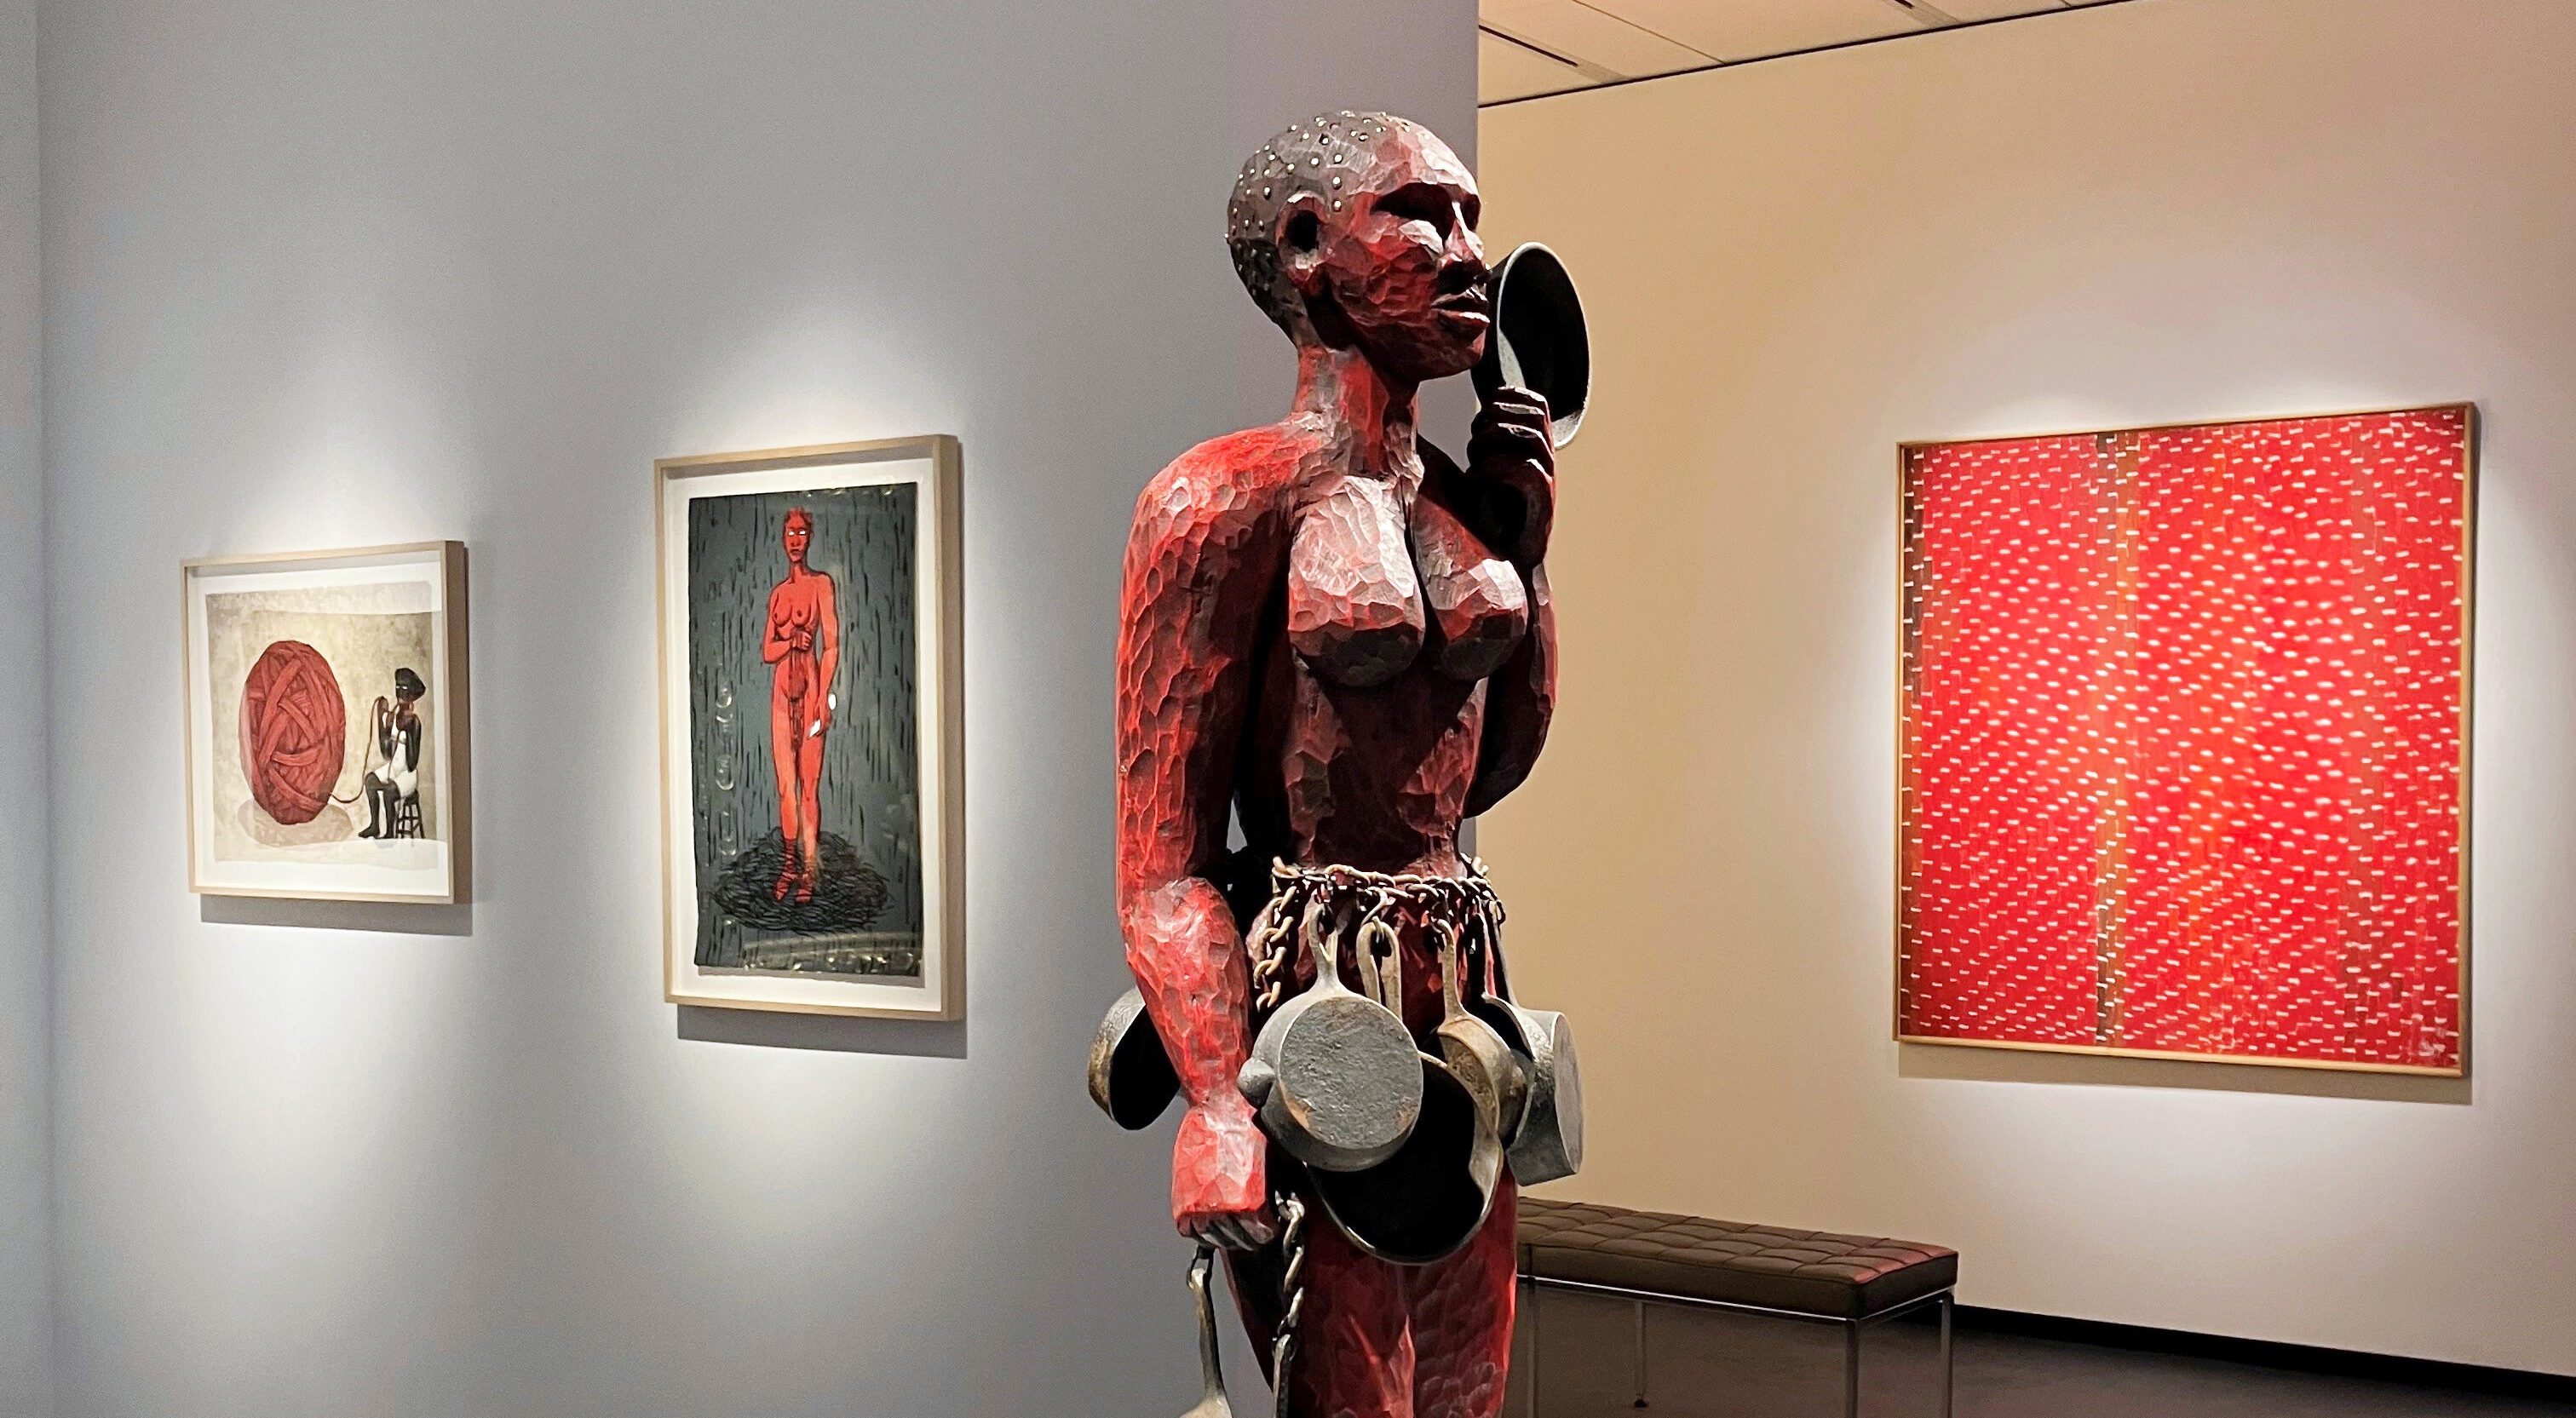 Artworks featuring the color red are displayed in a modern museum gallery. A central carved wooden sculpture of a powerful figure painted red and holding cast iron skillets is flanked by a vibrant red abstract painting and two prints that highlight the color.